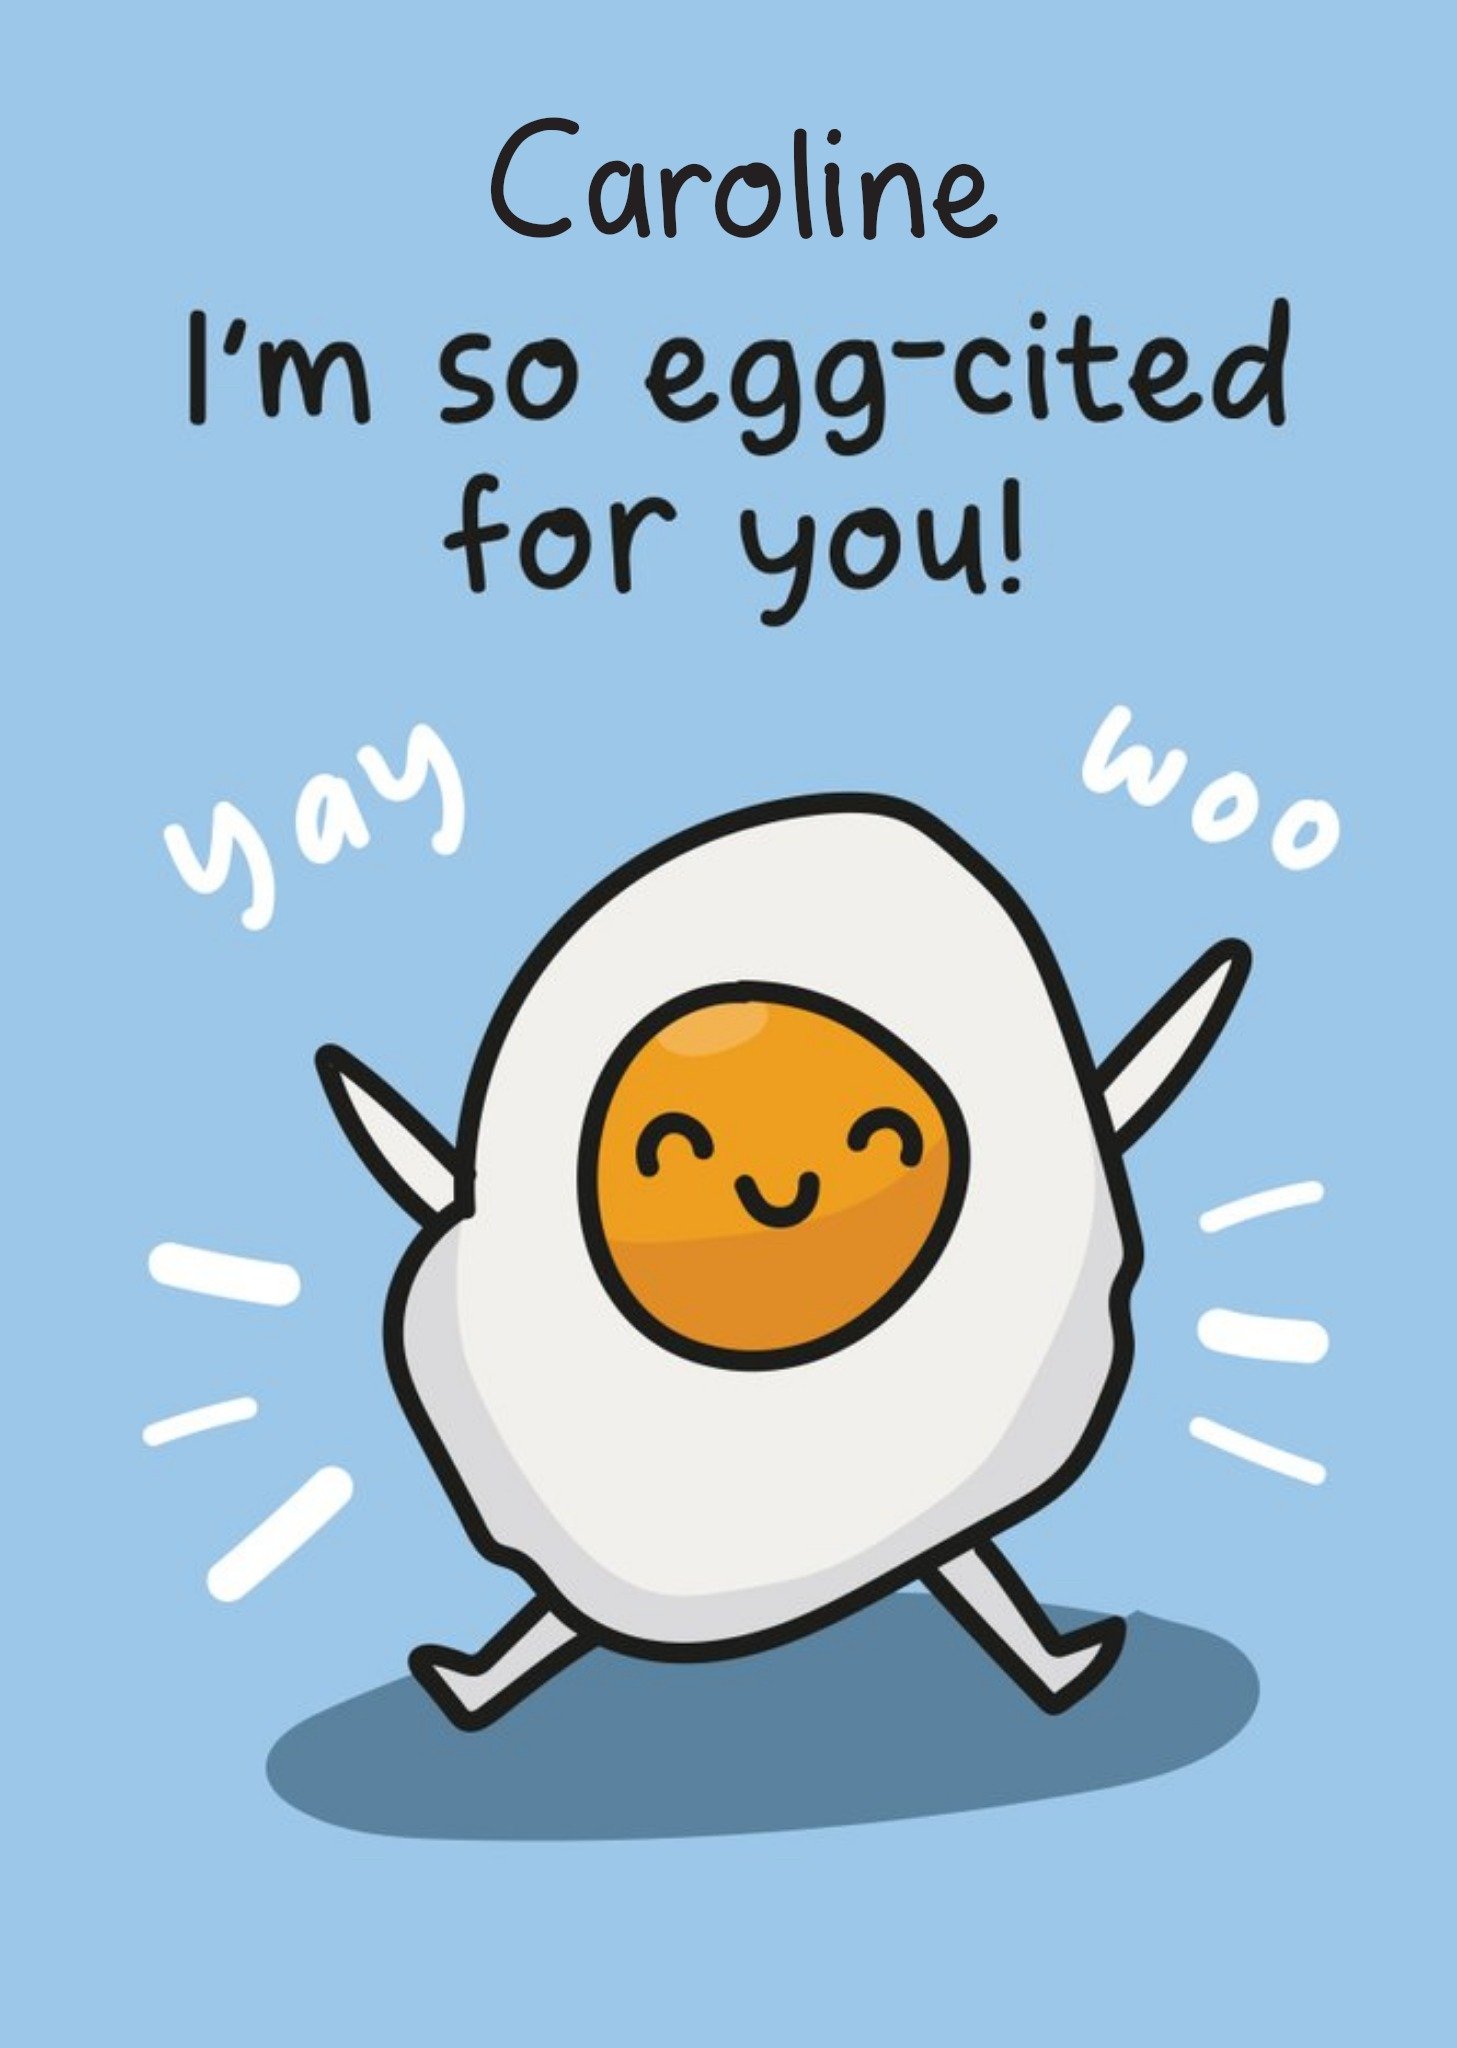 Moonpig Illustration Of An Egg. Woo, Hay. I'm So Egg-Cited For You Birthday Card, Large